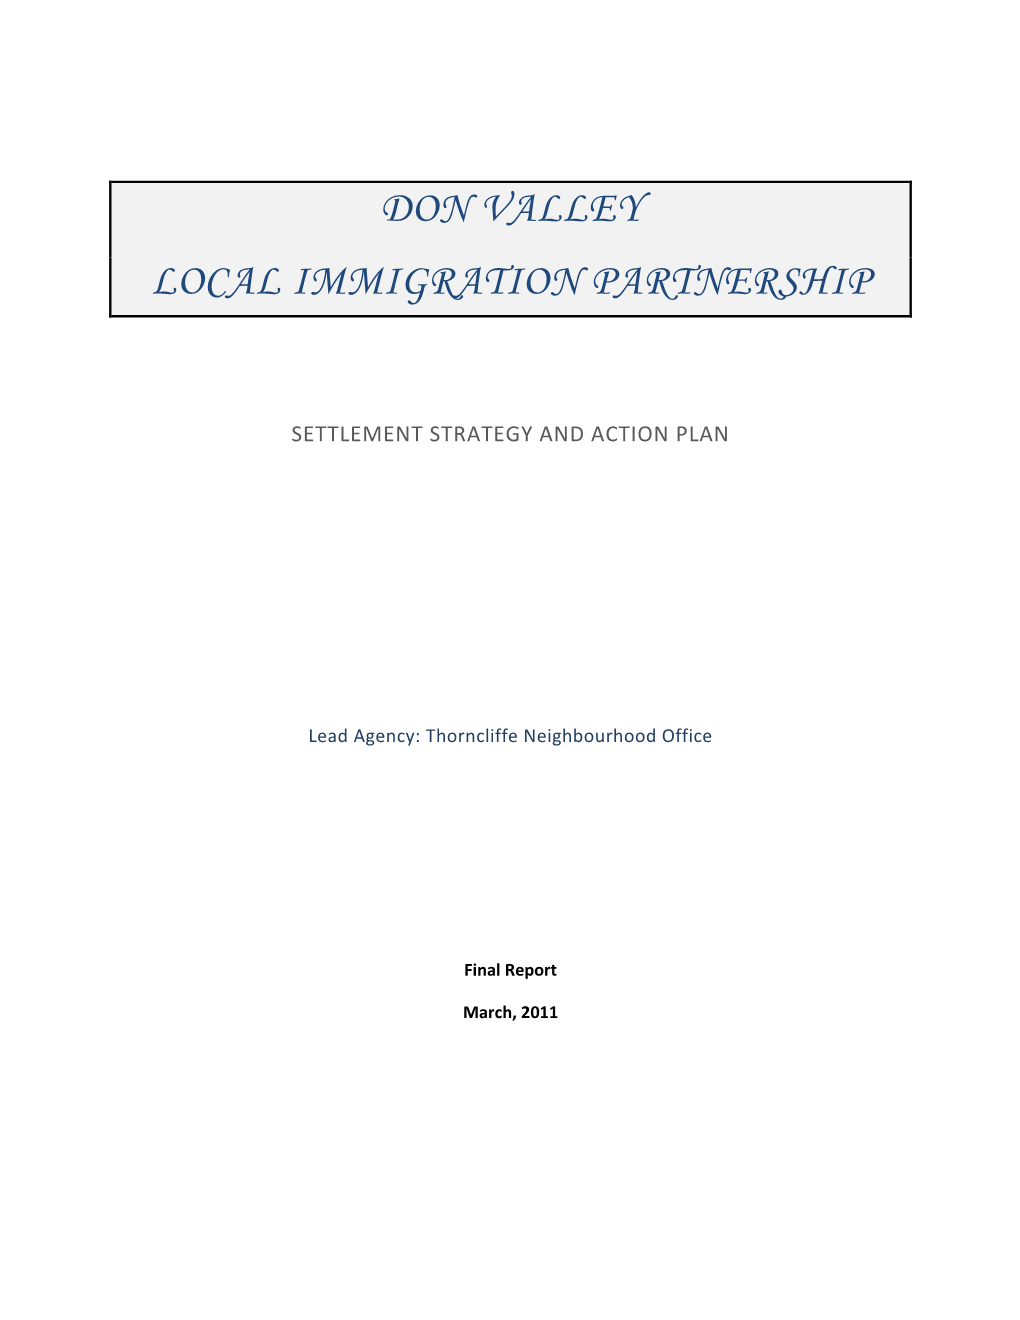 Don Valley Local Immigration Partnership